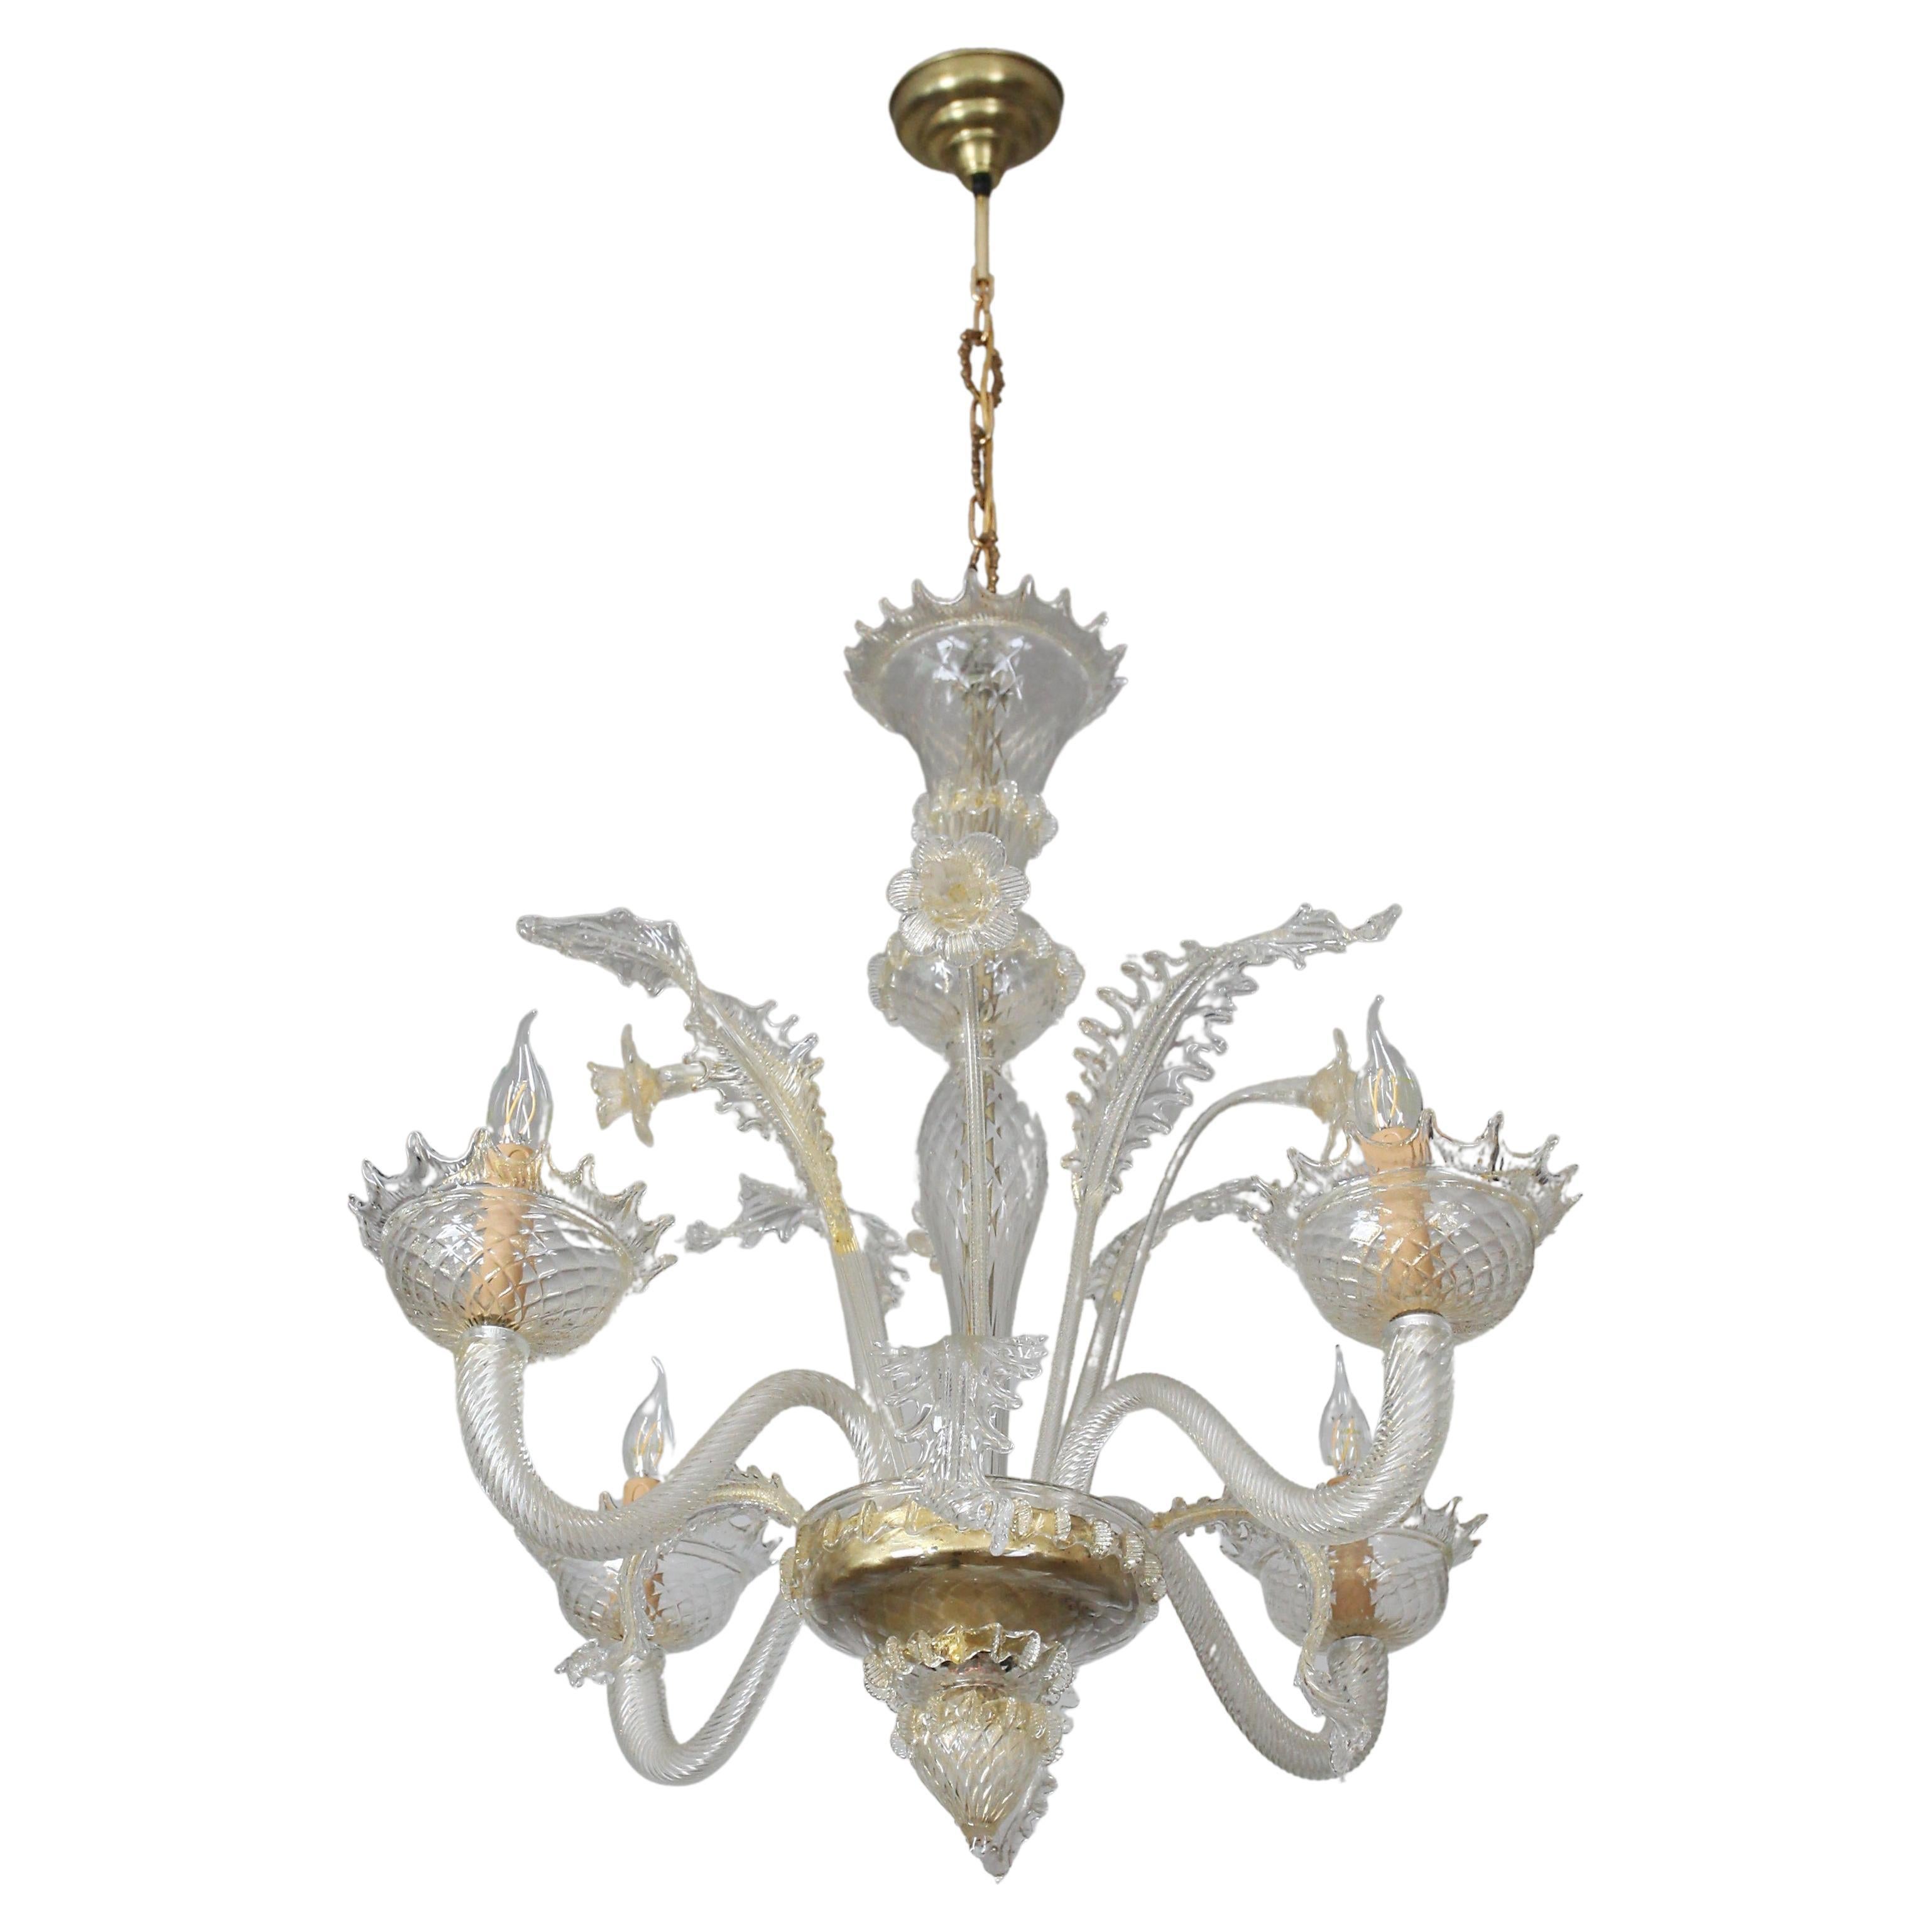 Why are chandeliers called chandeliers?